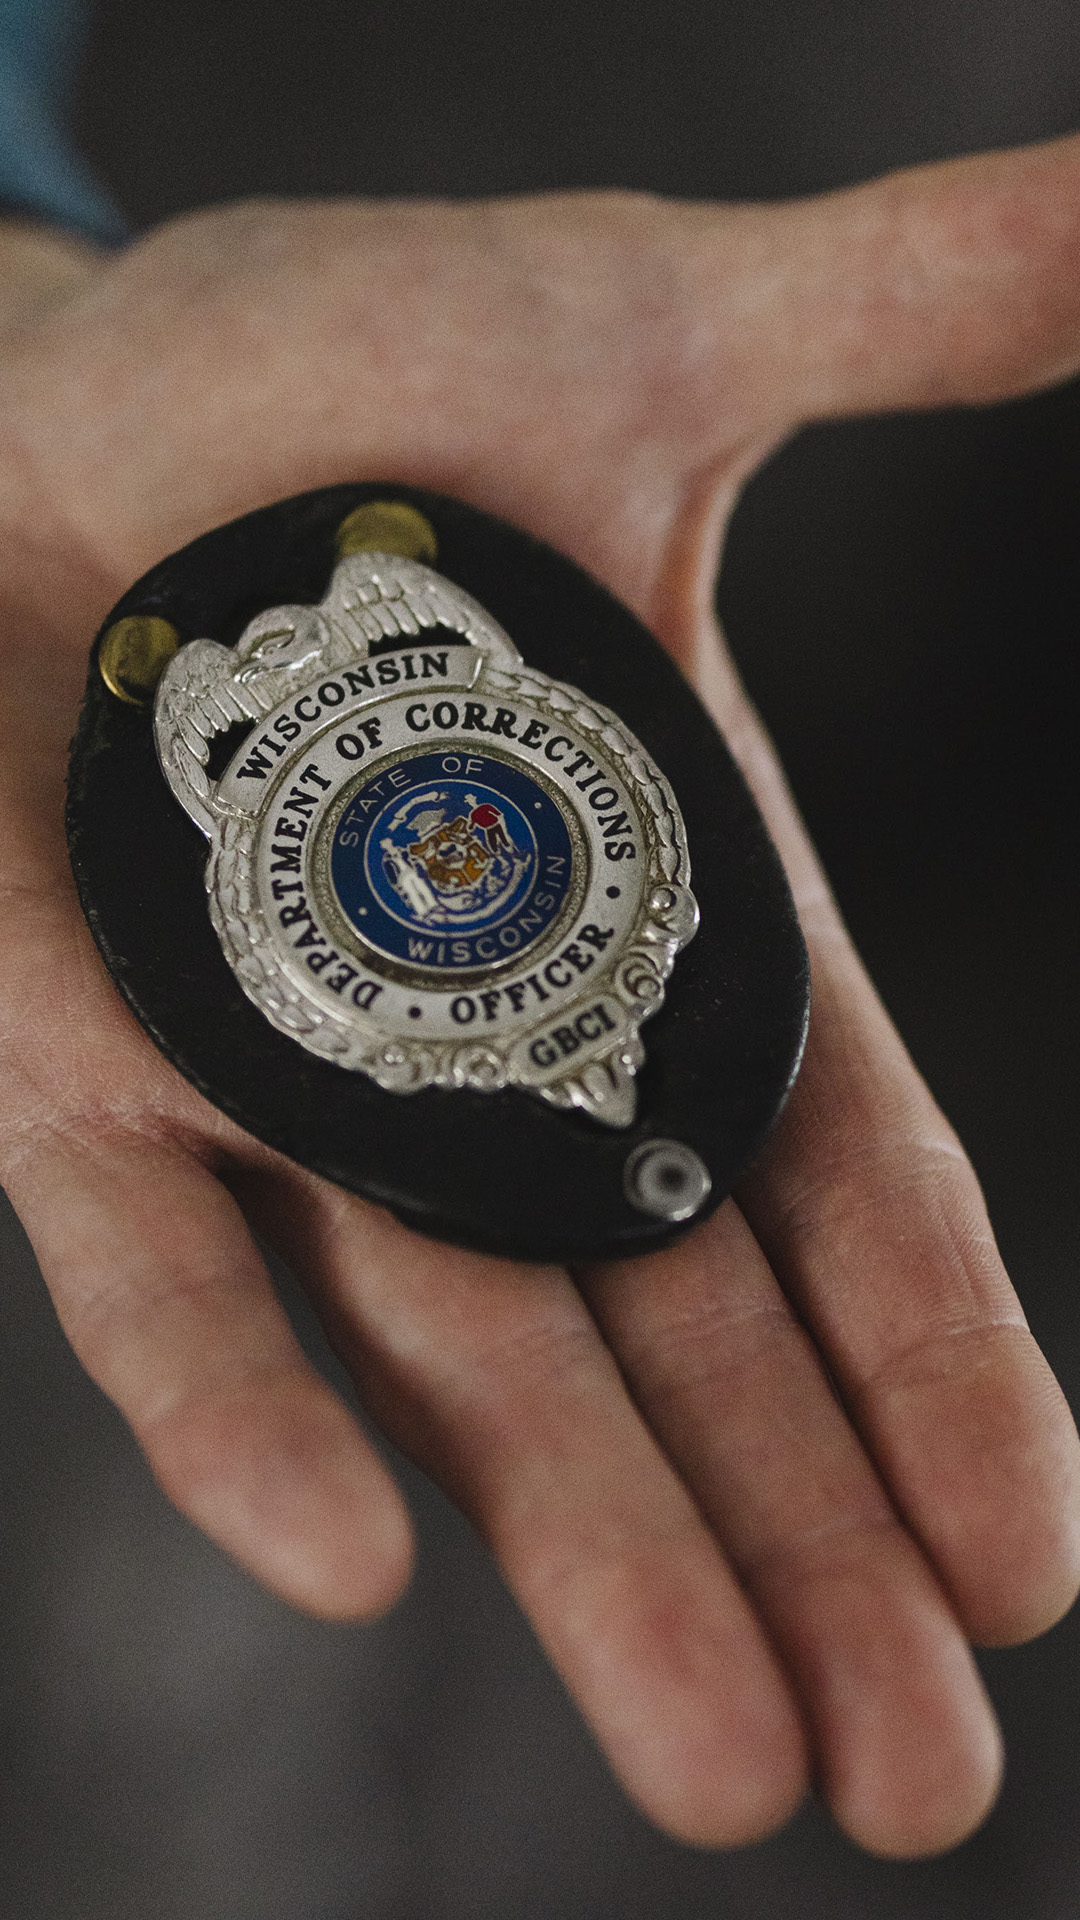 A left hand holds a law enforcement badge that reads "Wisconsin Department of Corrections" and "GBCI."